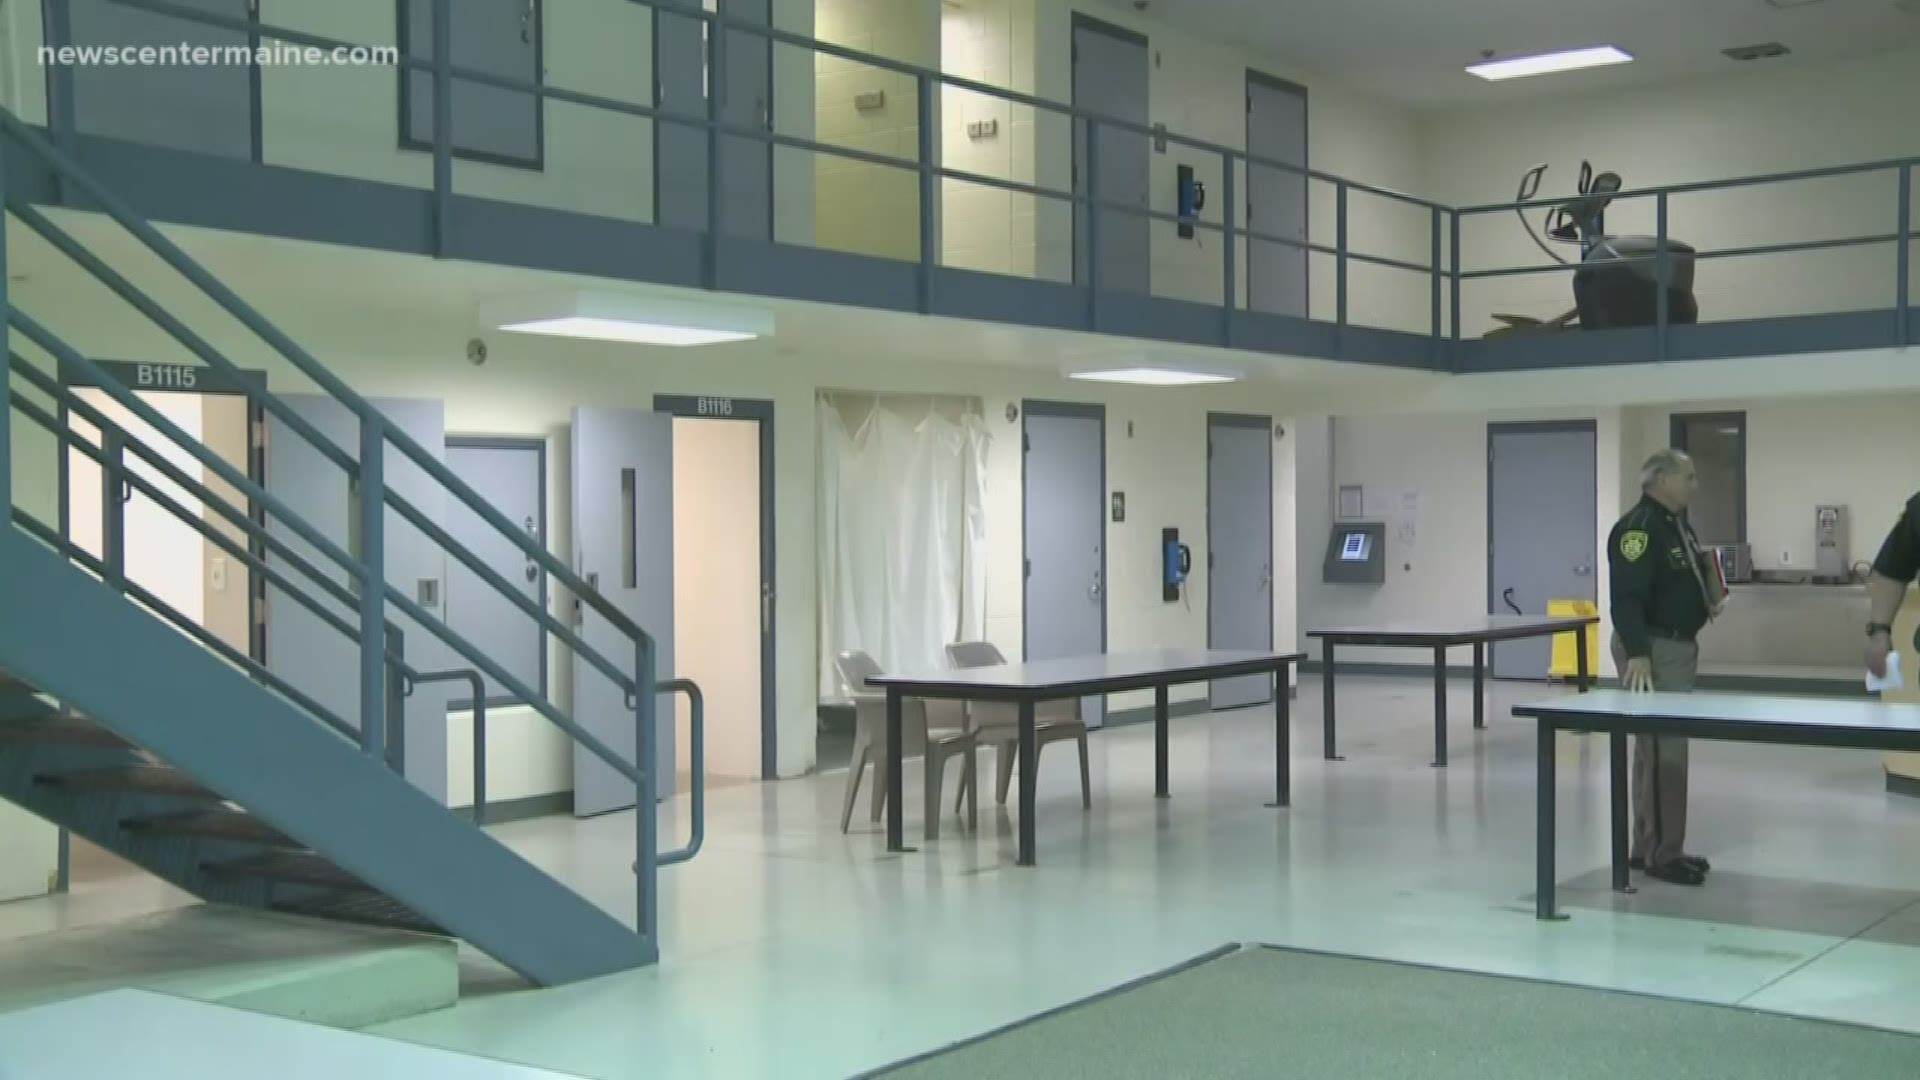 Maine sheriffs and lawmakers are looking for a better and more dependable process to pay for county jails.